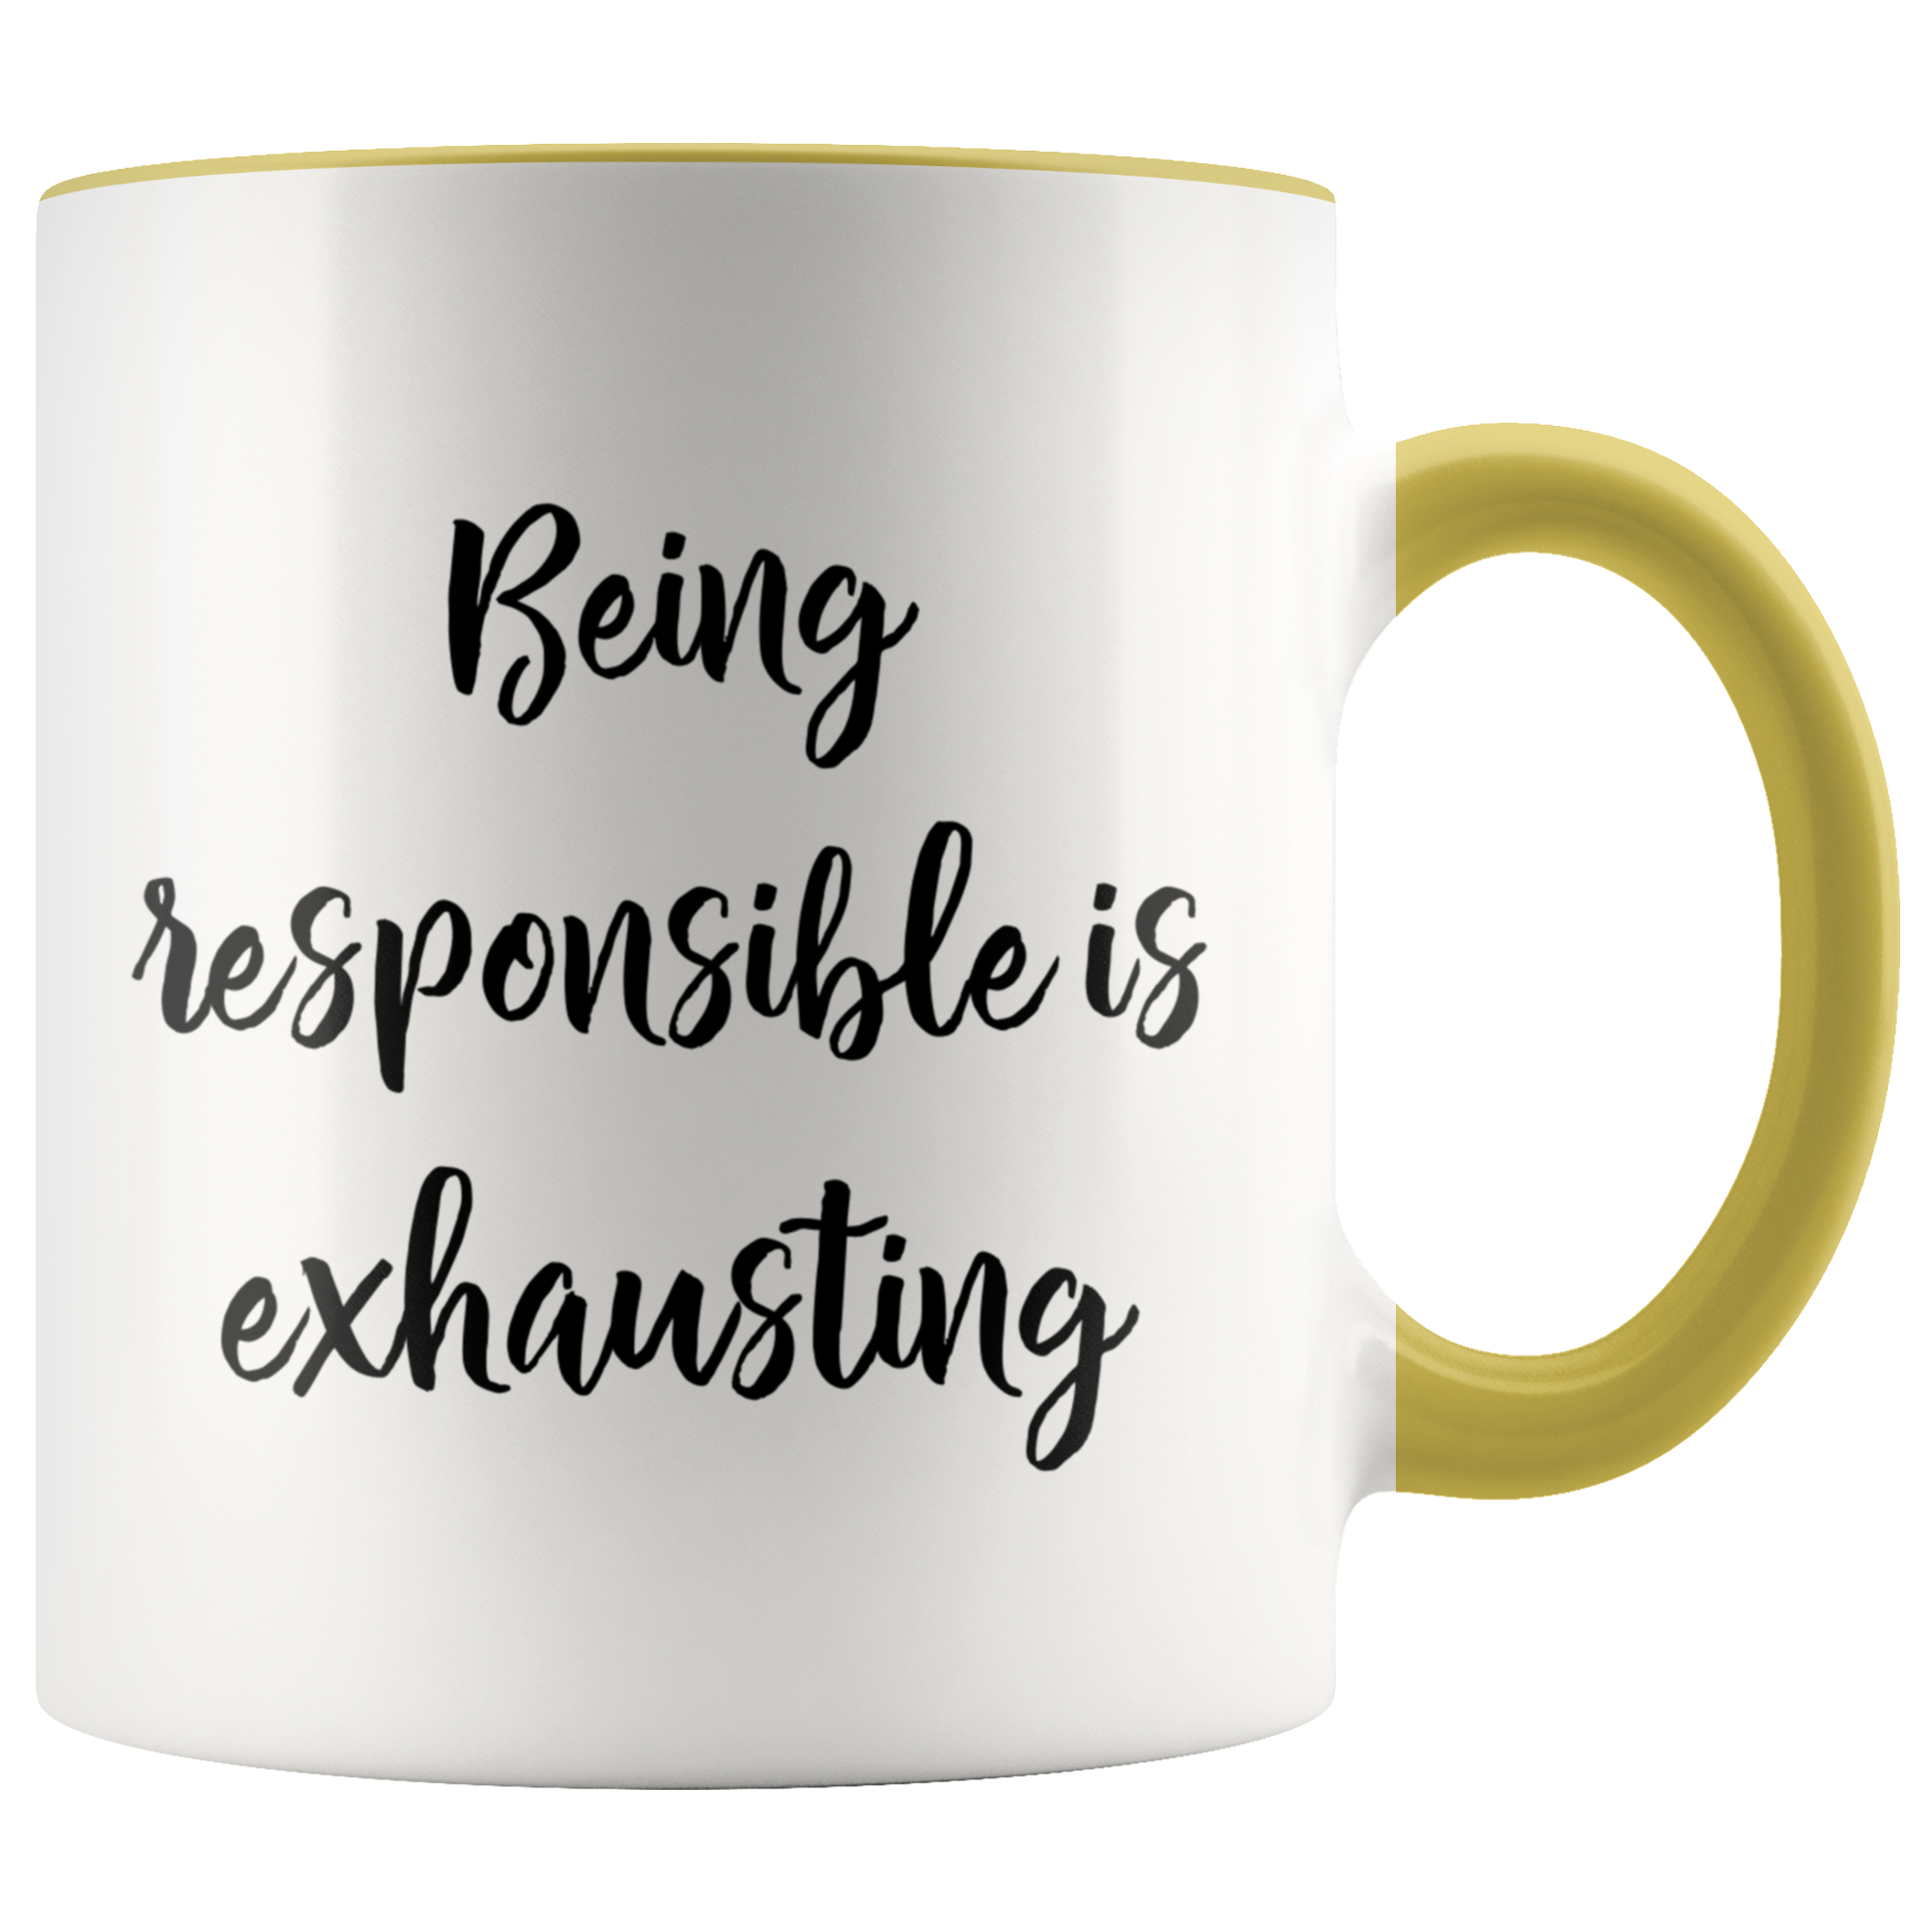 Being Responsible is Exhausting